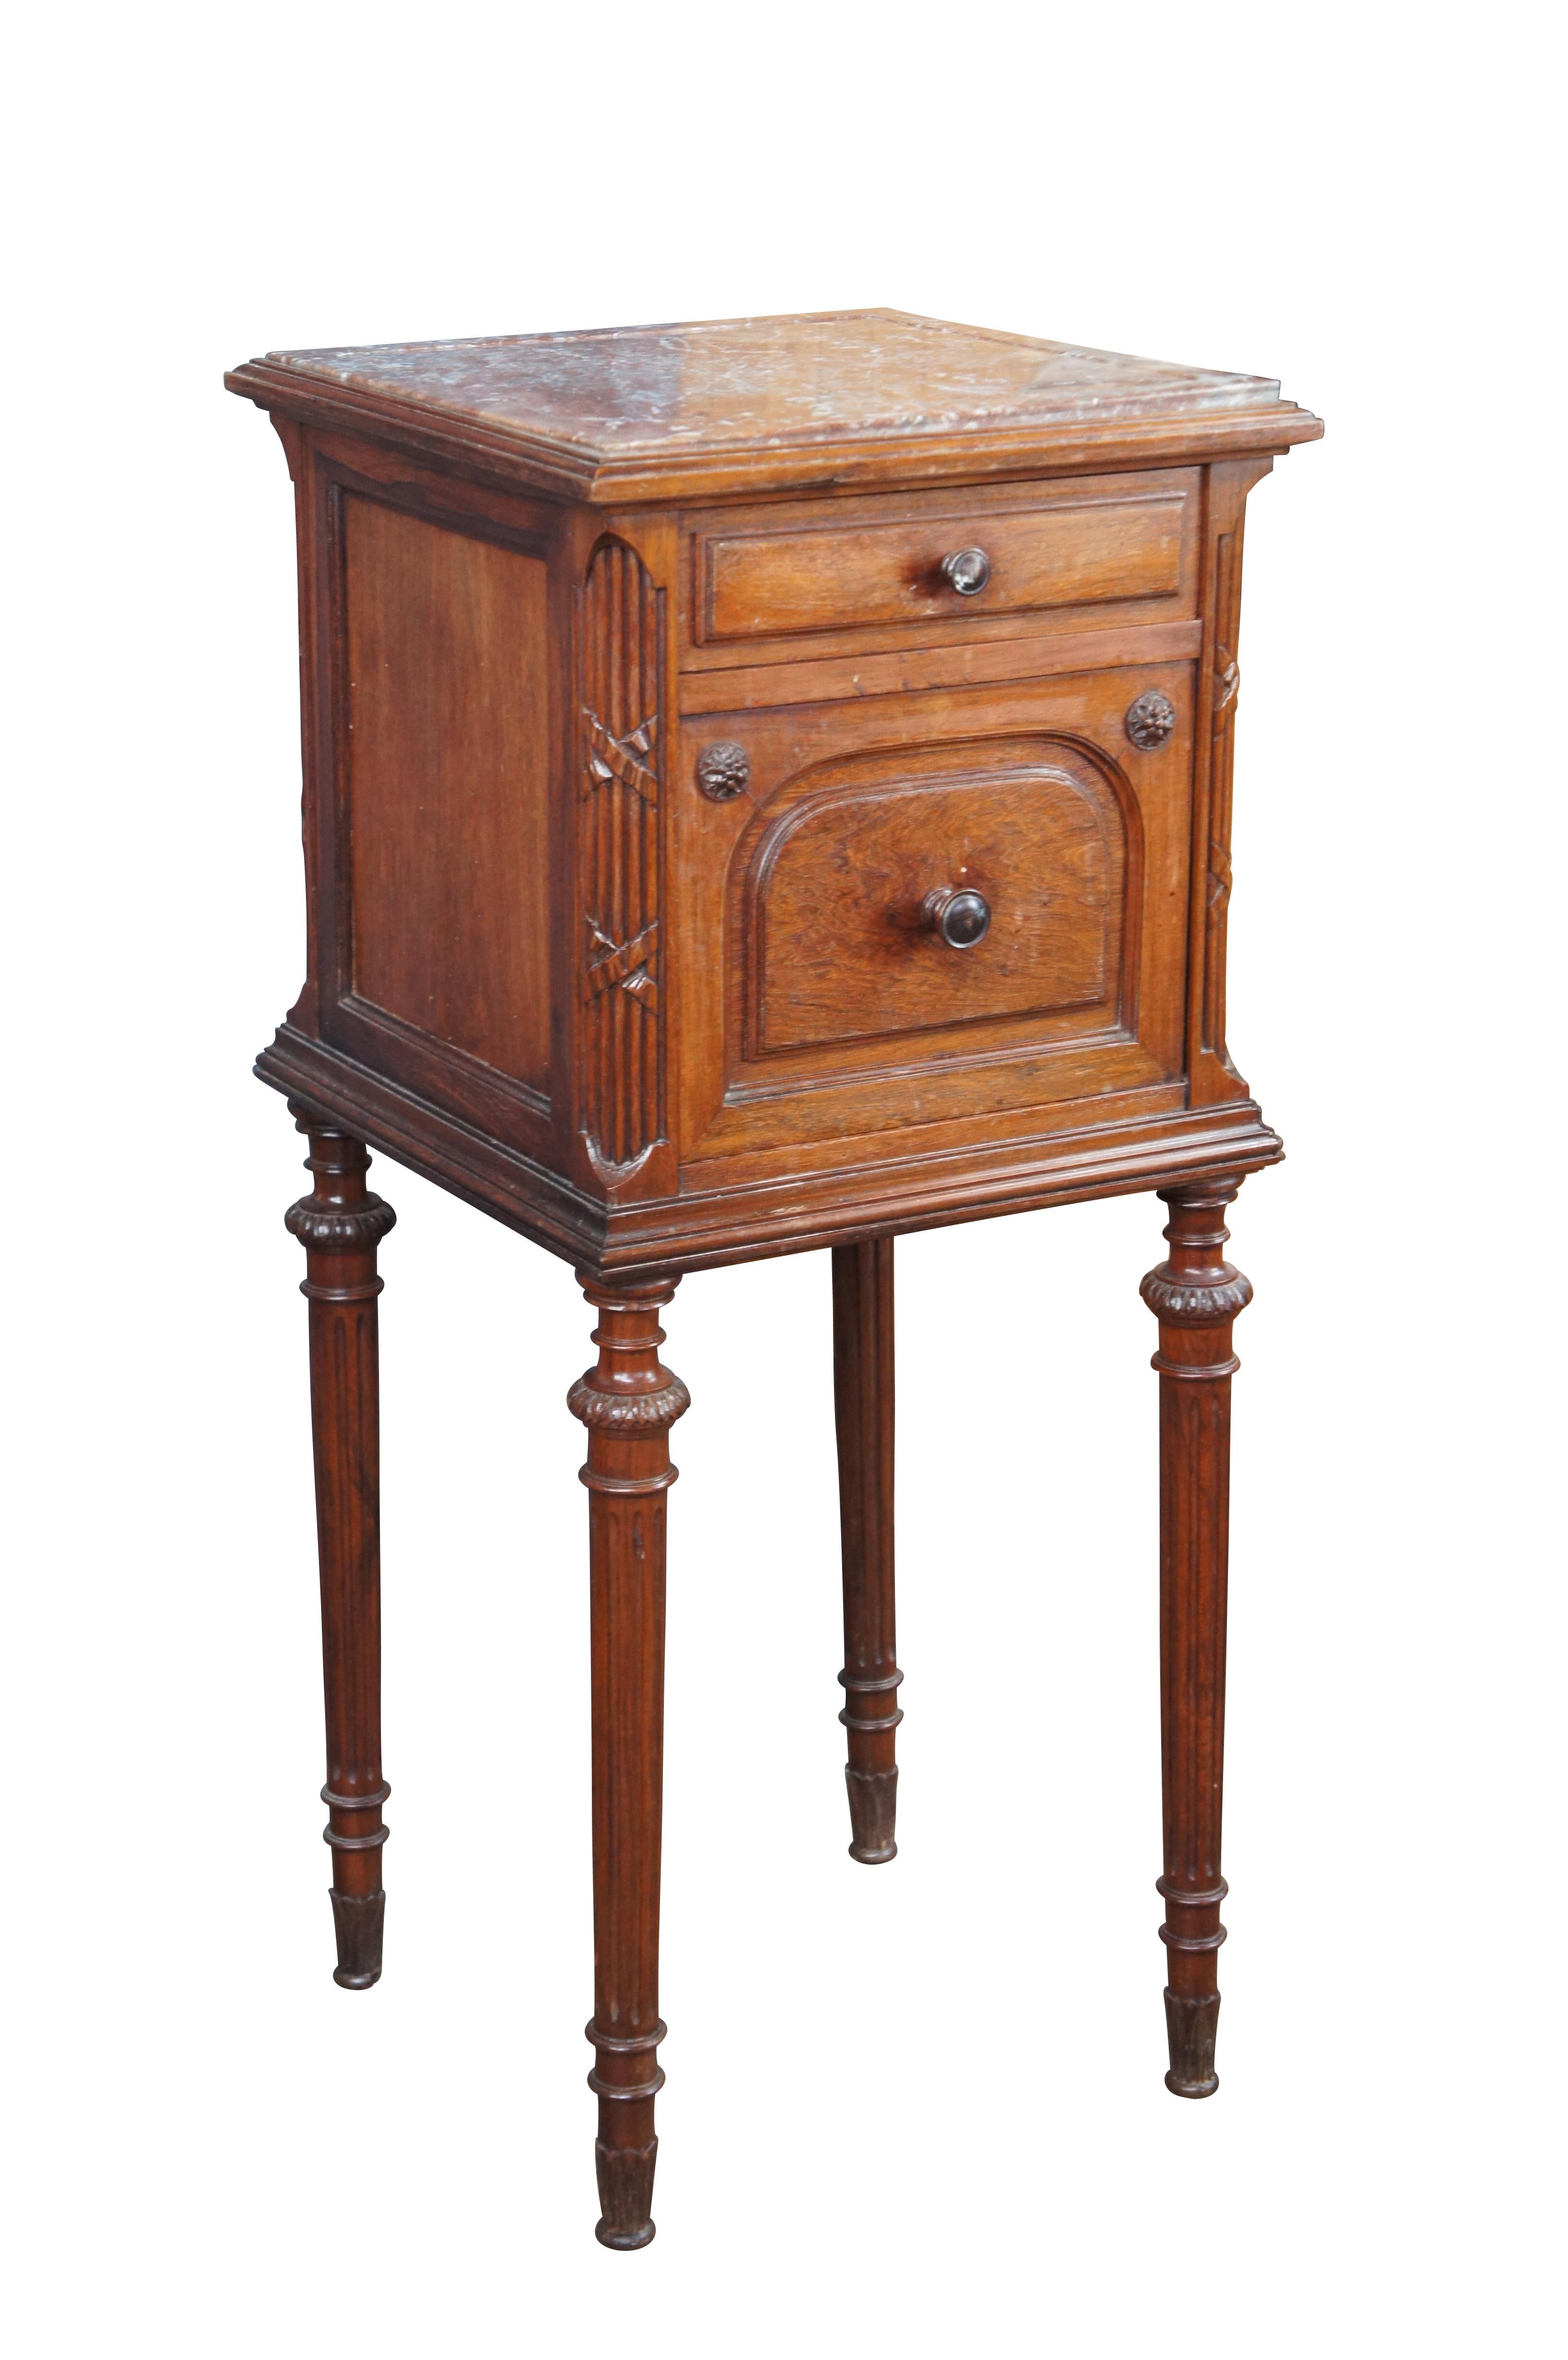 An antique late 19th Century French bedside table. Features a square frame made from walnut with inset rouge marble top. The case is accented by French medallions and ornate reeded and ribboned stiles. Includes one upper hand dovetailed drawer and a